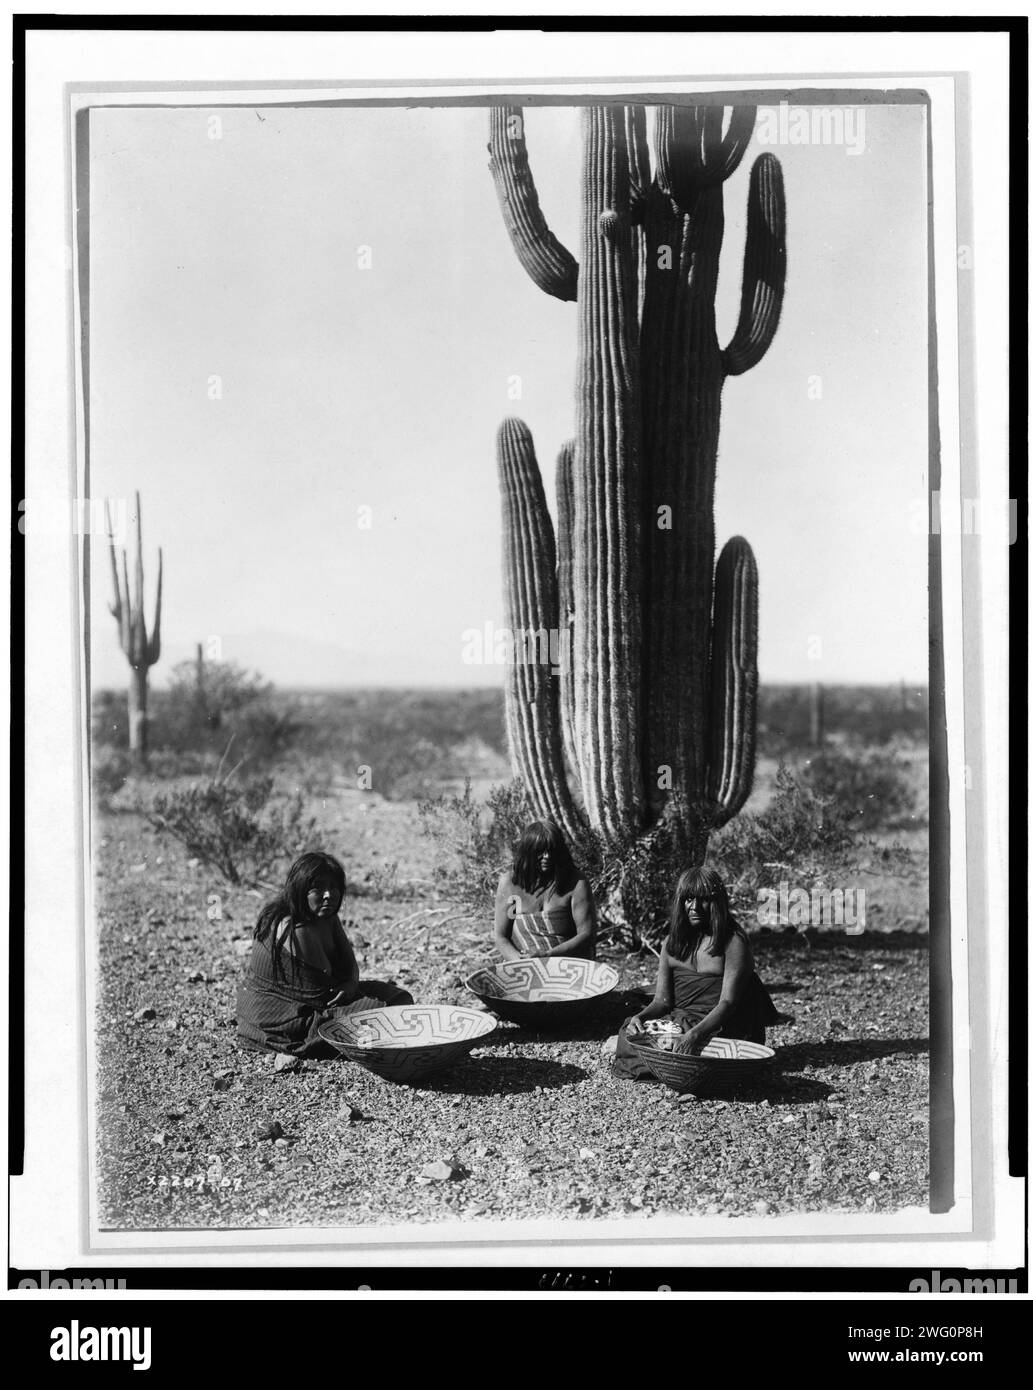 Saguaro gatherers, c1907. Three Maricopa Indians, seated in front of cactus, with baskets. Stock Photo